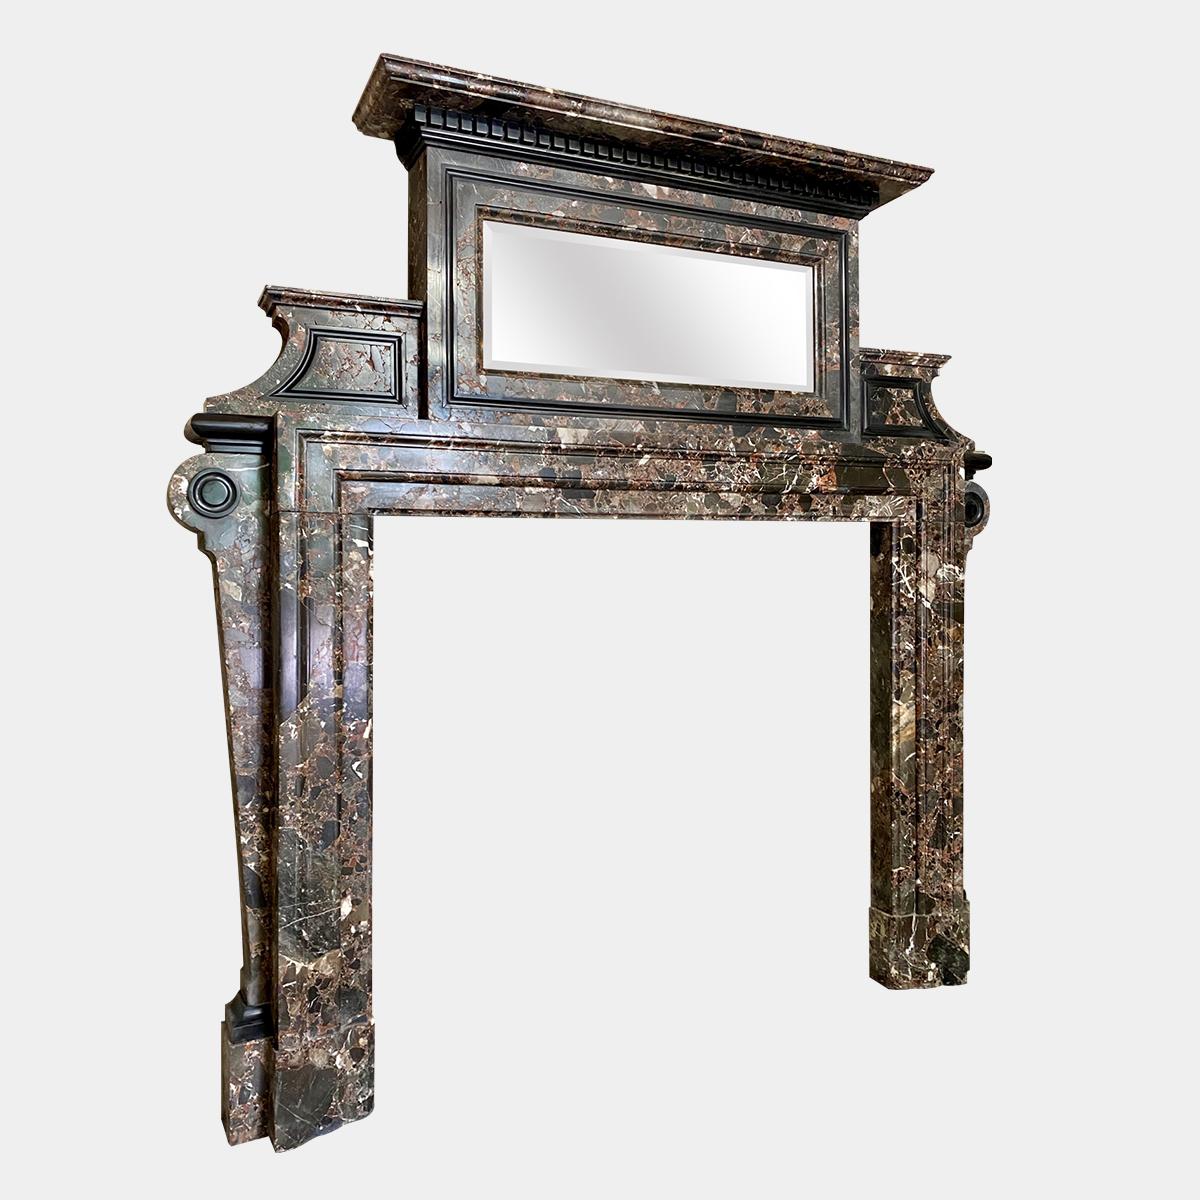 A rare and unusual Palladian style 19th century fireplace in Marrone Breccia and Belgian black marbles, with a marble mirrored overmantel. The top pediment with dental work carving in Belgian black marble, surmounts the beveled original mercury